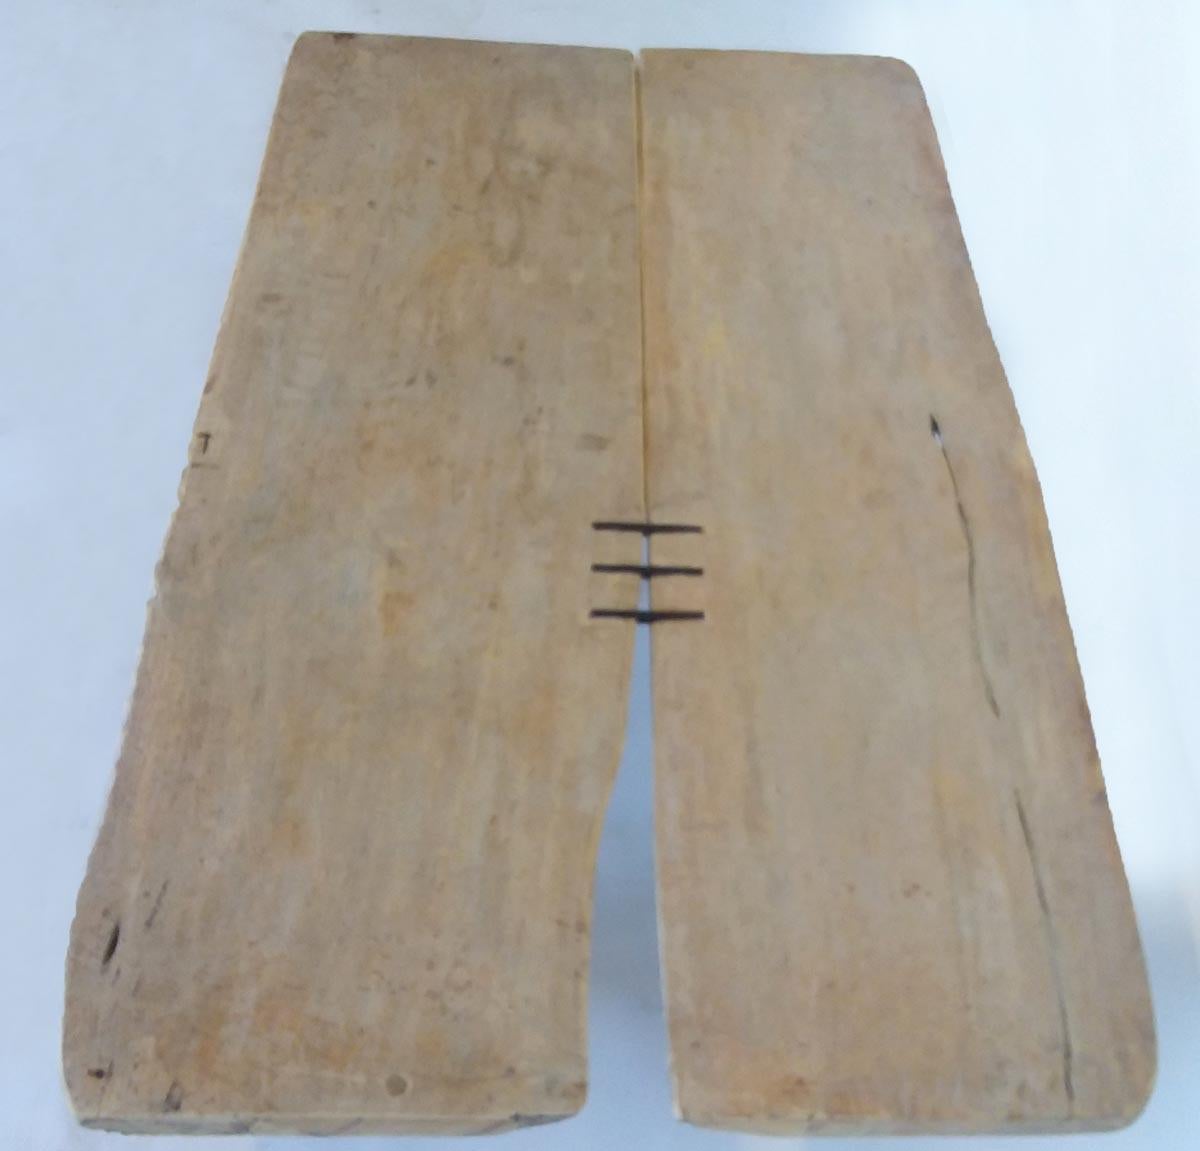 Wood Modern Organic Coffee Table with Metal Inlay by Dos Gallos Studio